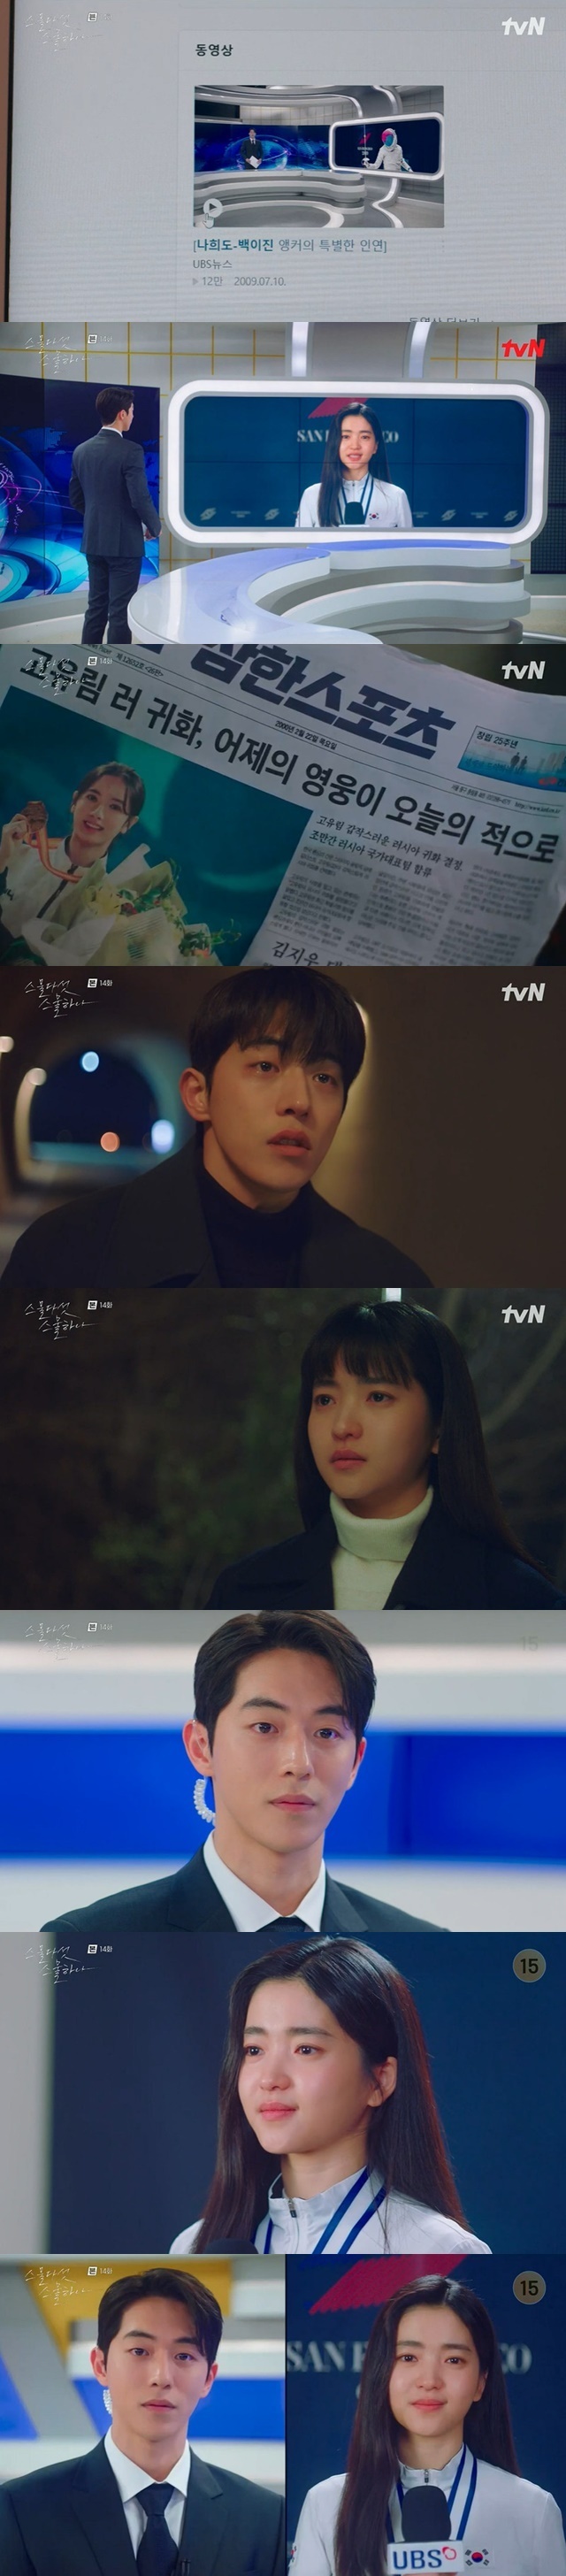 The breakup ending between Nam Joo-hyuk and Kim Tae-ri shocked.In the 14th episode of TVNs Saturday drama Twenty Five Twinty One broadcast on March 27 (playplayed by Kwon Do-eun/directed by Jung Ji-hyun), the breakup between Lee Jin (Nam Joo-hyuk) and Na Hee-do (Kim Tae-ri) was made a reality.At the end of the last broadcast, Lee Jin and Na Hee-do became lovers with a second kiss, and the broadcast began with Baek Jin, who became an anchor, interviewing Na Hee-do, who won the fencing gold medal in 2009.Back Lee Jin celebrated Na Hee-dos third consecutive gold medal, and Na Hee-do was the hardest gold medal to win the final against the late Yu Rim (Bona Boone) in 2001.At that time, Yu Rim was a member of Russia and played in the tournament under the name Yulia Go.Time then went back to 2000.Baek Jin and Na Hee-do informed the late Yu Rim, Moon Ji-woong (Choi Hyun-wook), and Ji Seung-wan (Lee Joo-myung) that they had just started dating, and everyone congratulated the two.If you cry, you kill them, the late Yim threatened to tell Lee Jin.Then, the situation began to change rapidly as the father of Yu Rim was involved in a traffic accident.The parents of the high-income families who were in debt had to pay the settlement fee for the treatment, and the couples fight became frequent, and the high-income Rim changed the plan to go to the unemployment team to Russia naturalization.The only way to solve all the situations at once was to get bigger money through Russia naturalization. Yang Chan-mi (Kim Hye-eun) knew the situation of the late Yu Rim and helped the naturalization process.The first story to be written by the late Yu Rim, Lee Jin reported alone: Na Hee-do, Moon Ji-woong, and Ji Seung-wan were surprised to see the news.People cursed and pointed out that the high Yu Rim had sold the country for money.Because of the news, the high Yu Rim rushed out of the country as if he were being chased by people, and did not promise Moon Ji-woong the future.But Moon Ji-woong promised love by starting Alba to go to see Yu Rim to Russia.Lee Jin sat down under a graffiti labeled Yu Rim traitor, and shed tears of guilt, and Na Hee-do witnessed it.Lee Jin is genuinely worried that he will hurt Na Hee-do the same, and he has clouded the future of Lee Jin and Na Hee-do.In the appearance of those two people, the screen went back to the news interview in 2009 at the beginning of broadcasting.Ive always been cheering with the same heart since the beginning, said Lee Jin, who told Na Hee-do, Im the same.Im cheering for you with the same heart wherever I am, said Lee Jin, who added, And Im late, but Im celebrating my marriage.